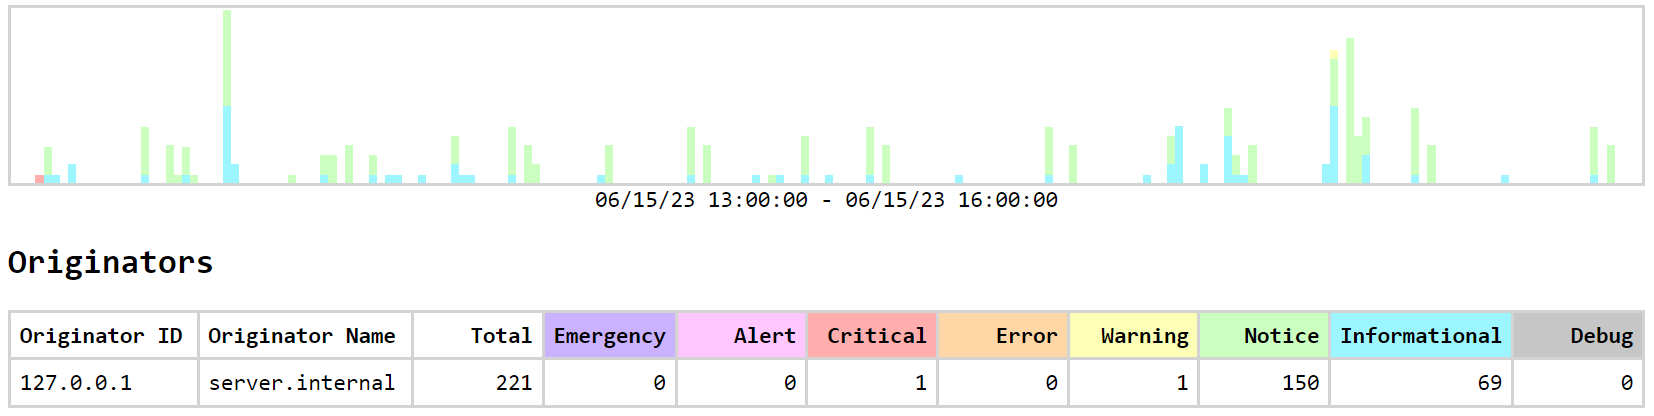 Syslog Watcher 6.5 / Syslog Report Example